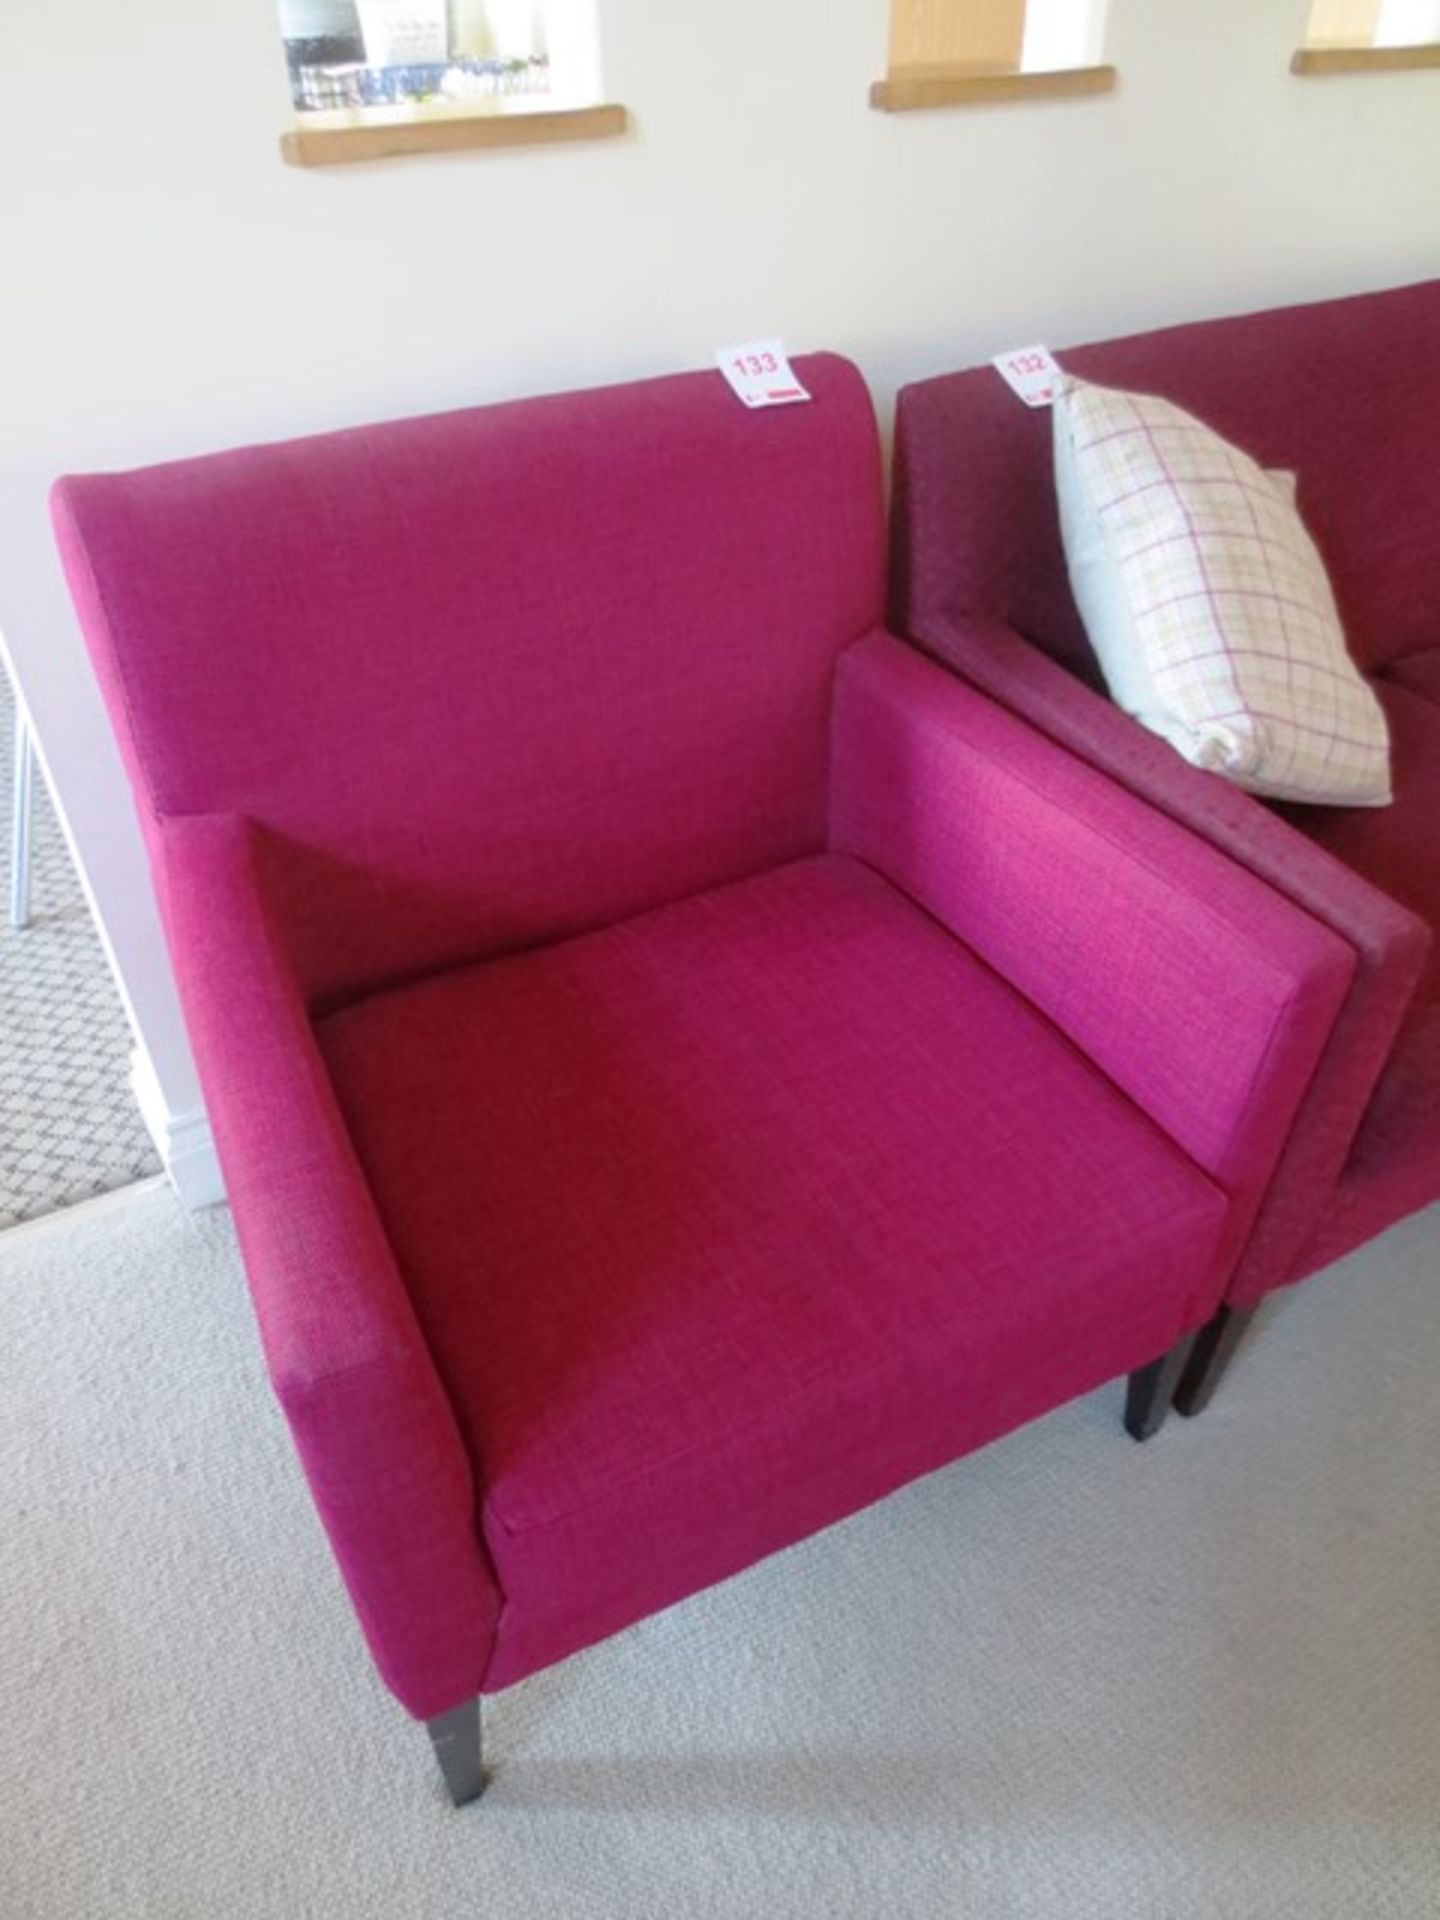 Purple/pink cloth upholstered armchair, with dark wood effect legs, approx dimensions: 700mm